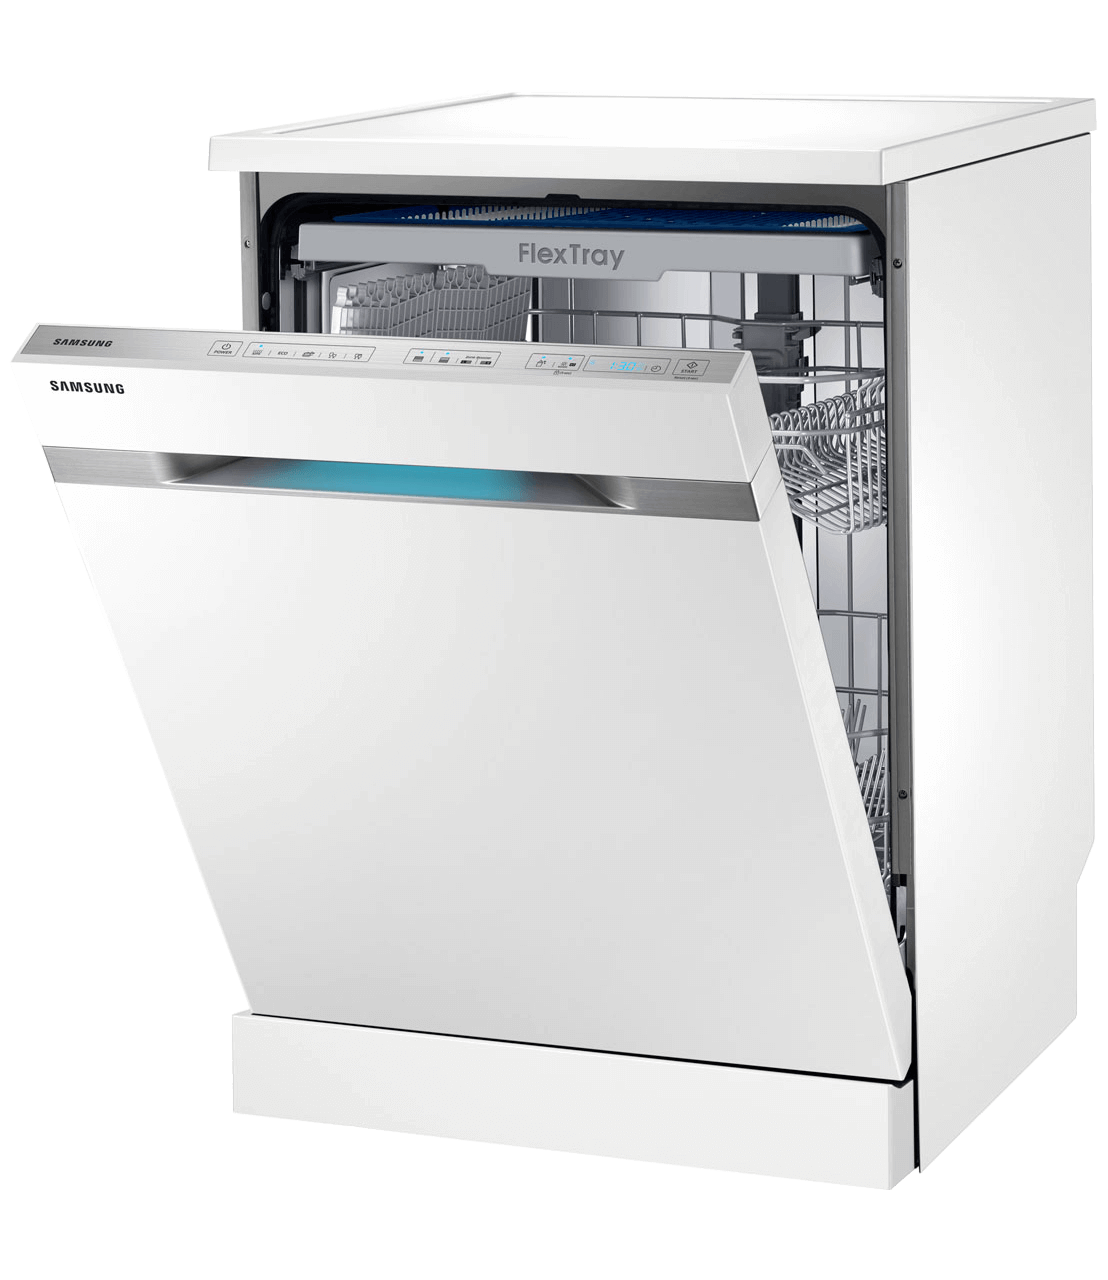 Dishwasher Repair In The San Francisco Bay Area